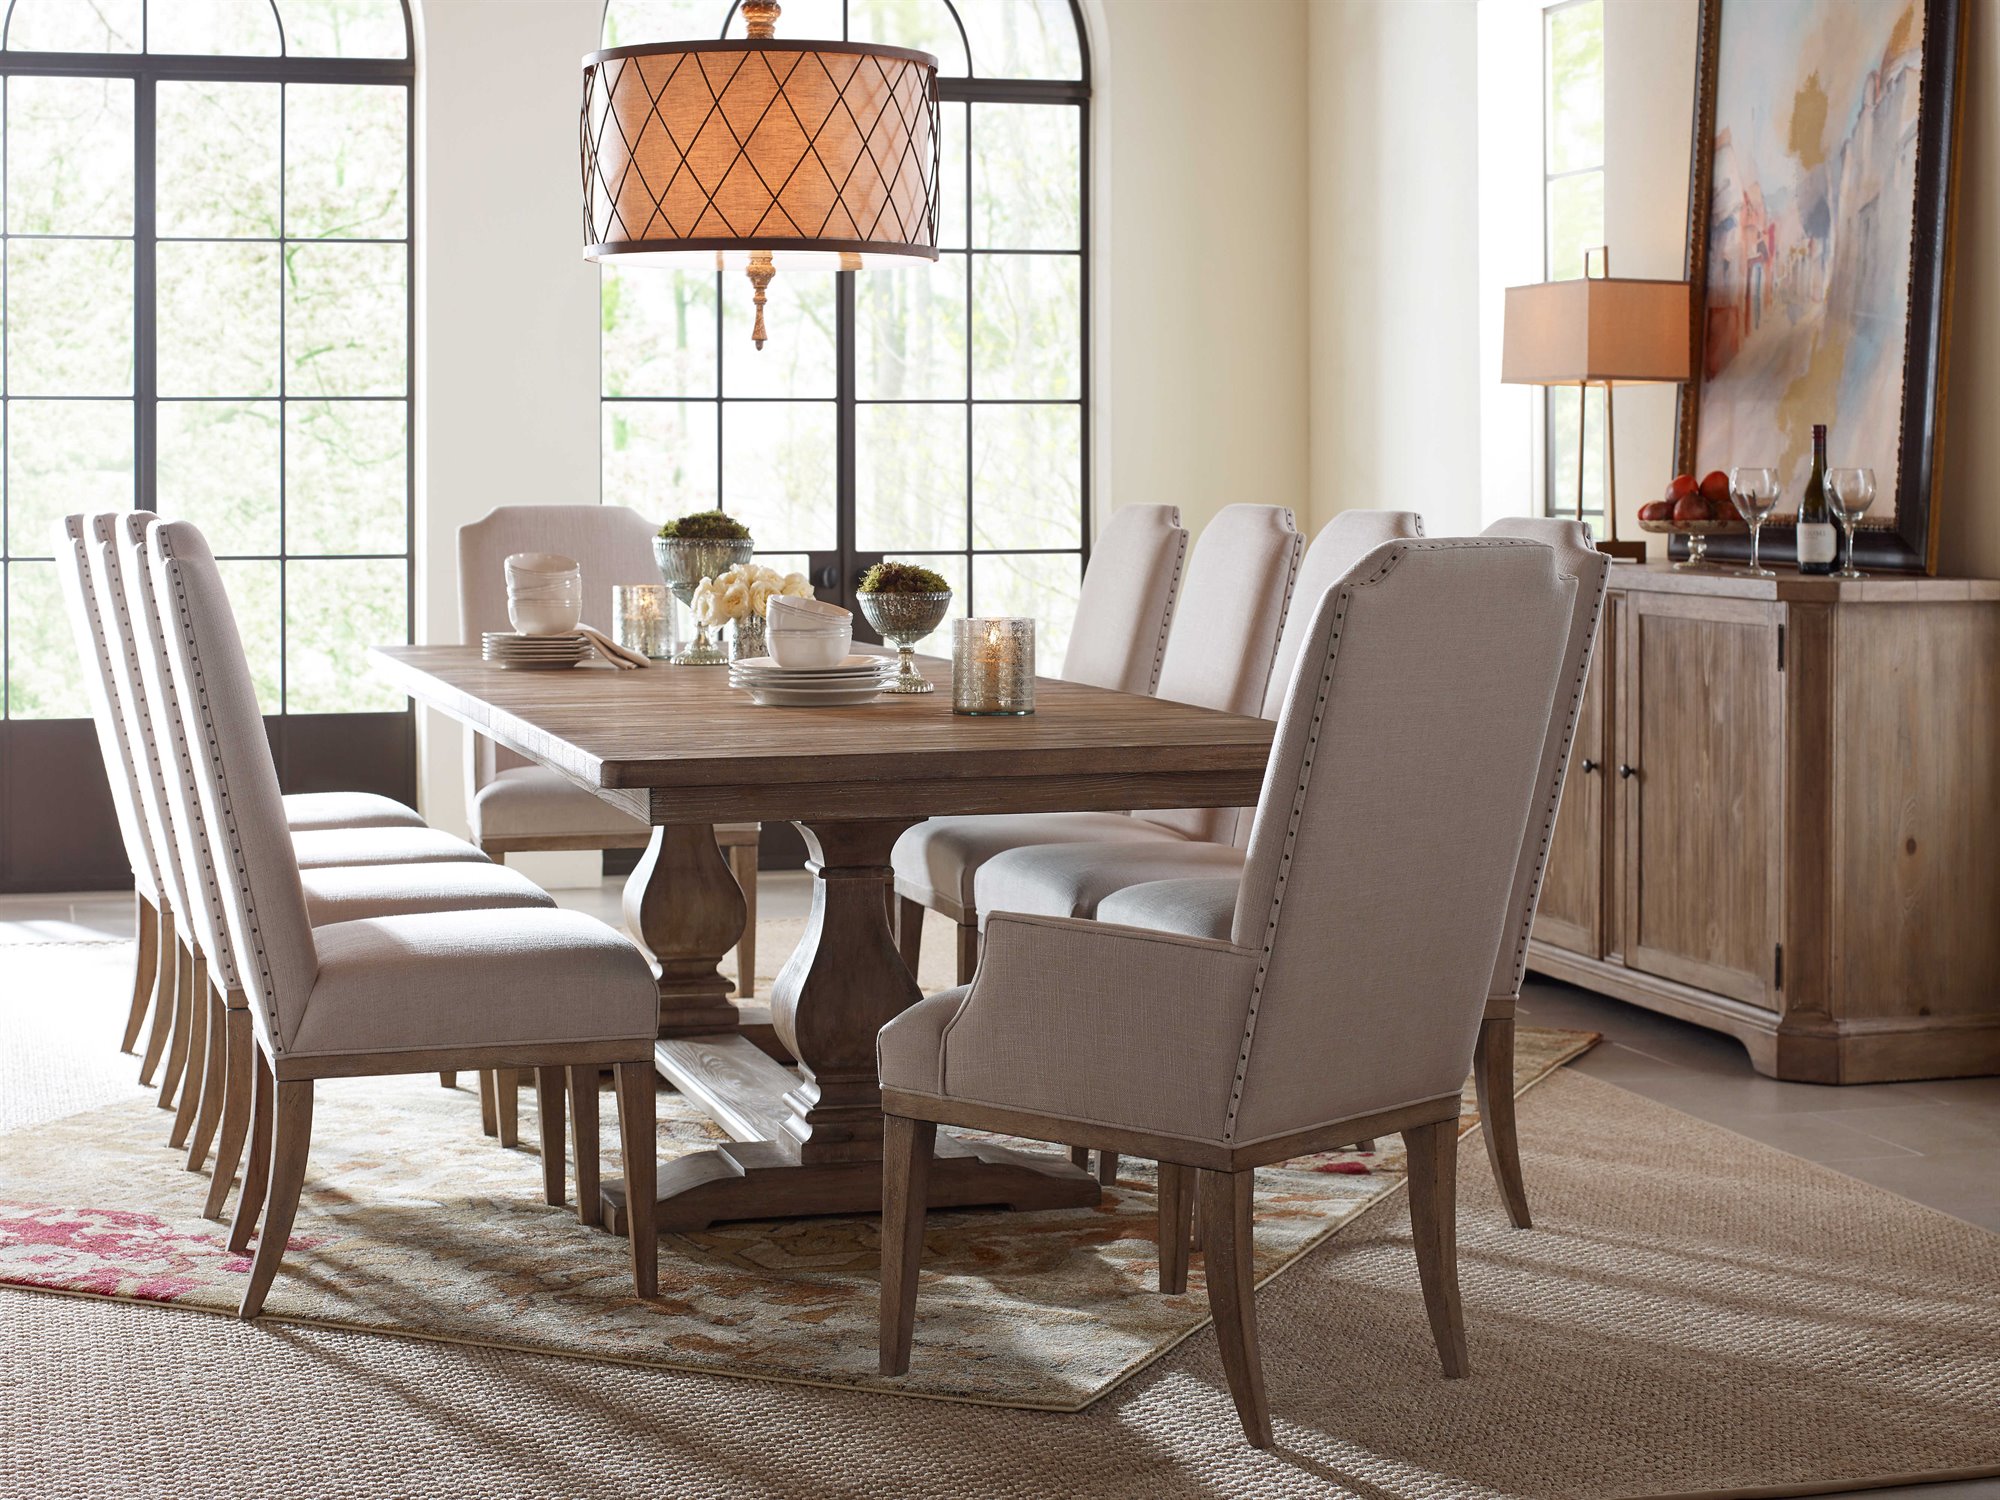 rachael ray dining room sets